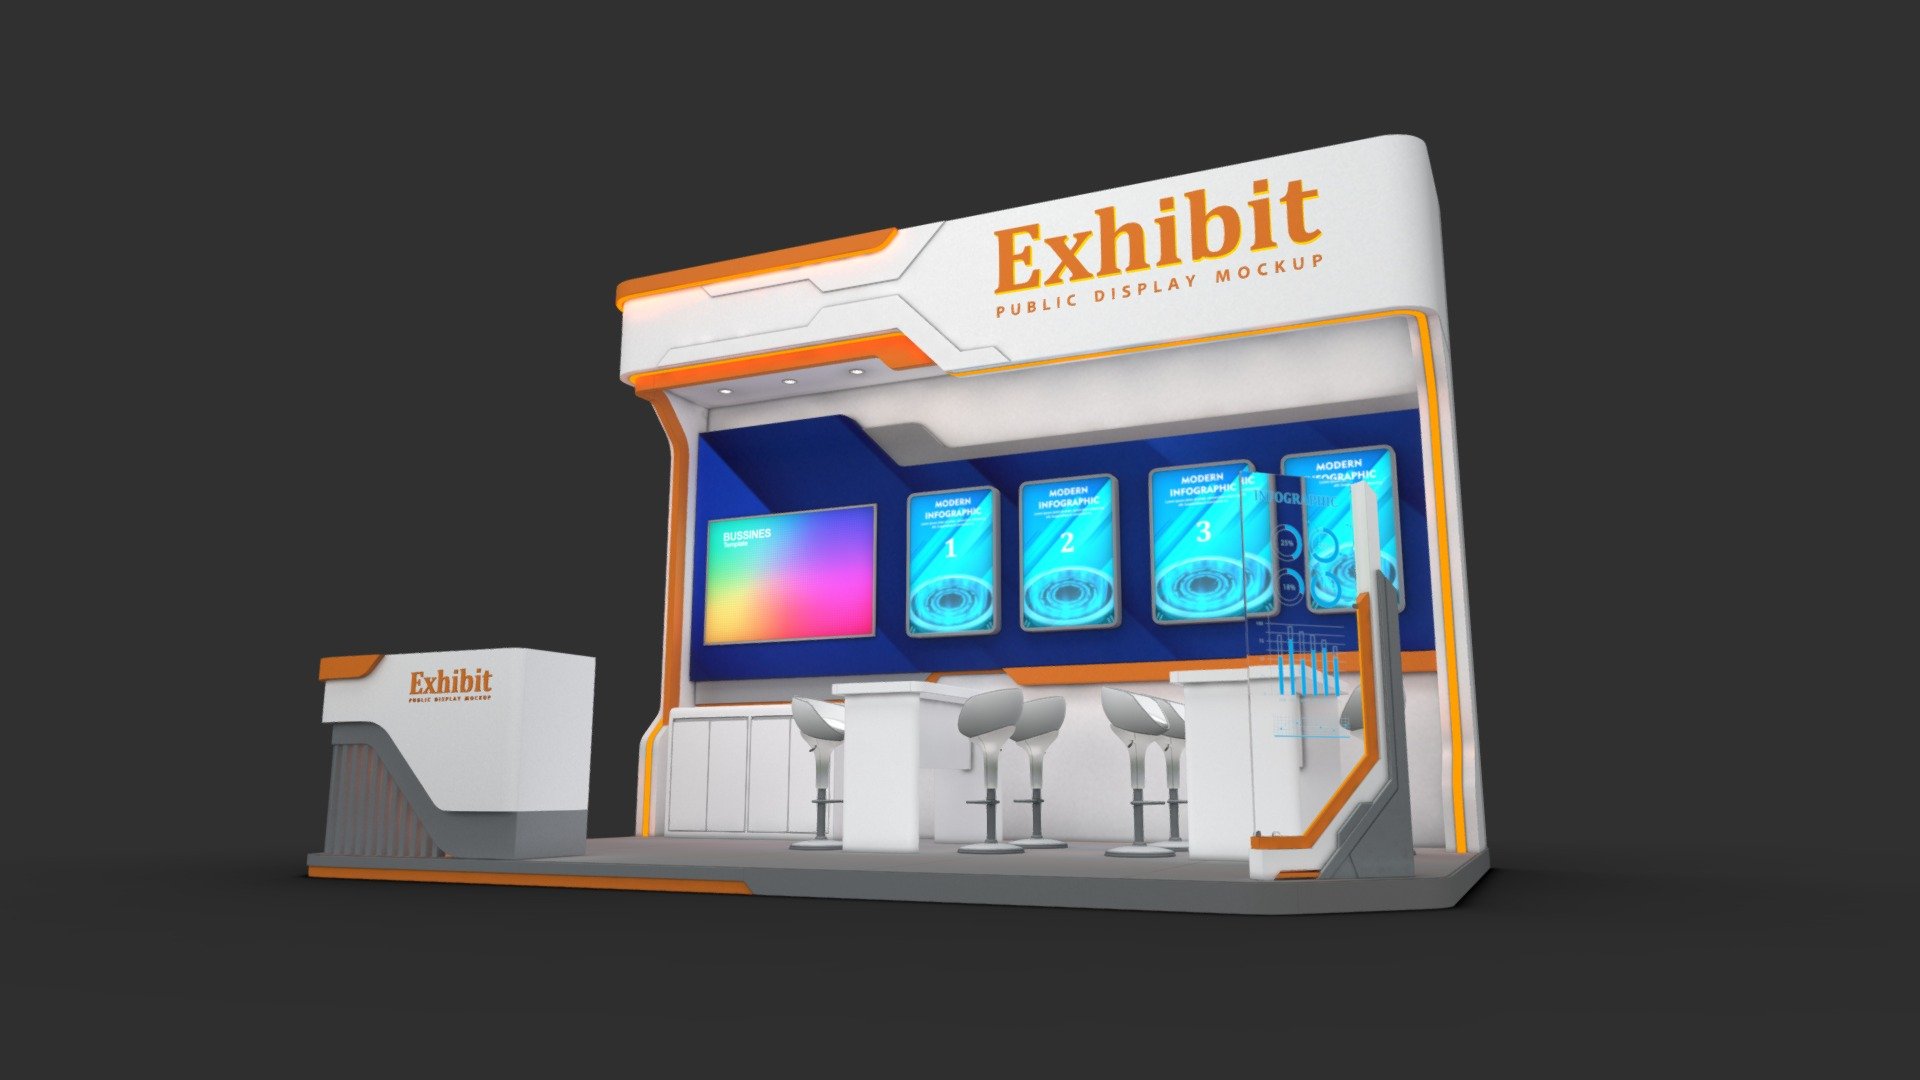 Exhibition - Stand / booth / stall  - Design

15 Sqm / 5x3m / 3 Exposed sides

Files Format: 

1. Autodesk 3Ds max 2020 / V ray 5

2. Autodesk 3Ds max 2017 / Default scanline

3. Obj Format





EXHIBITION STAND_2205_obj standard map




EXHIBITION STAND_2205_obj V ray complete map



4. Fbx format





EXHIBITION STAND_2205_fbx standard map




EXHIBITION STAND_2205_fbx V ray complete map



Unit: cm

thank you for visiting

If you are interested in other models, please visit my collection



EXHIBITION STAND 36 Sqm
https://sketchfab.com/fasih.lisan/collections/exhibition-stand-36-sqm-34b6419aa7ec4556b18d8a381c51db77

EXHIBITION STAND 18 Sqm
https://sketchfab.com/fasih.lisan/collections/exhibition-stand-18-sqm-9a22add1012e4c36961b6e1db26a0280

EXHIBITION STAND 9 sqm
https://sketchfab.com/fasih.lisan/collections/exhibition-stand-9-sqm-2afc738a25634768ba5335da876876f2 - EXHIBITION STAND_2205_15 Sqm - Buy Royalty Free 3D model by fasih.lisan 3d model